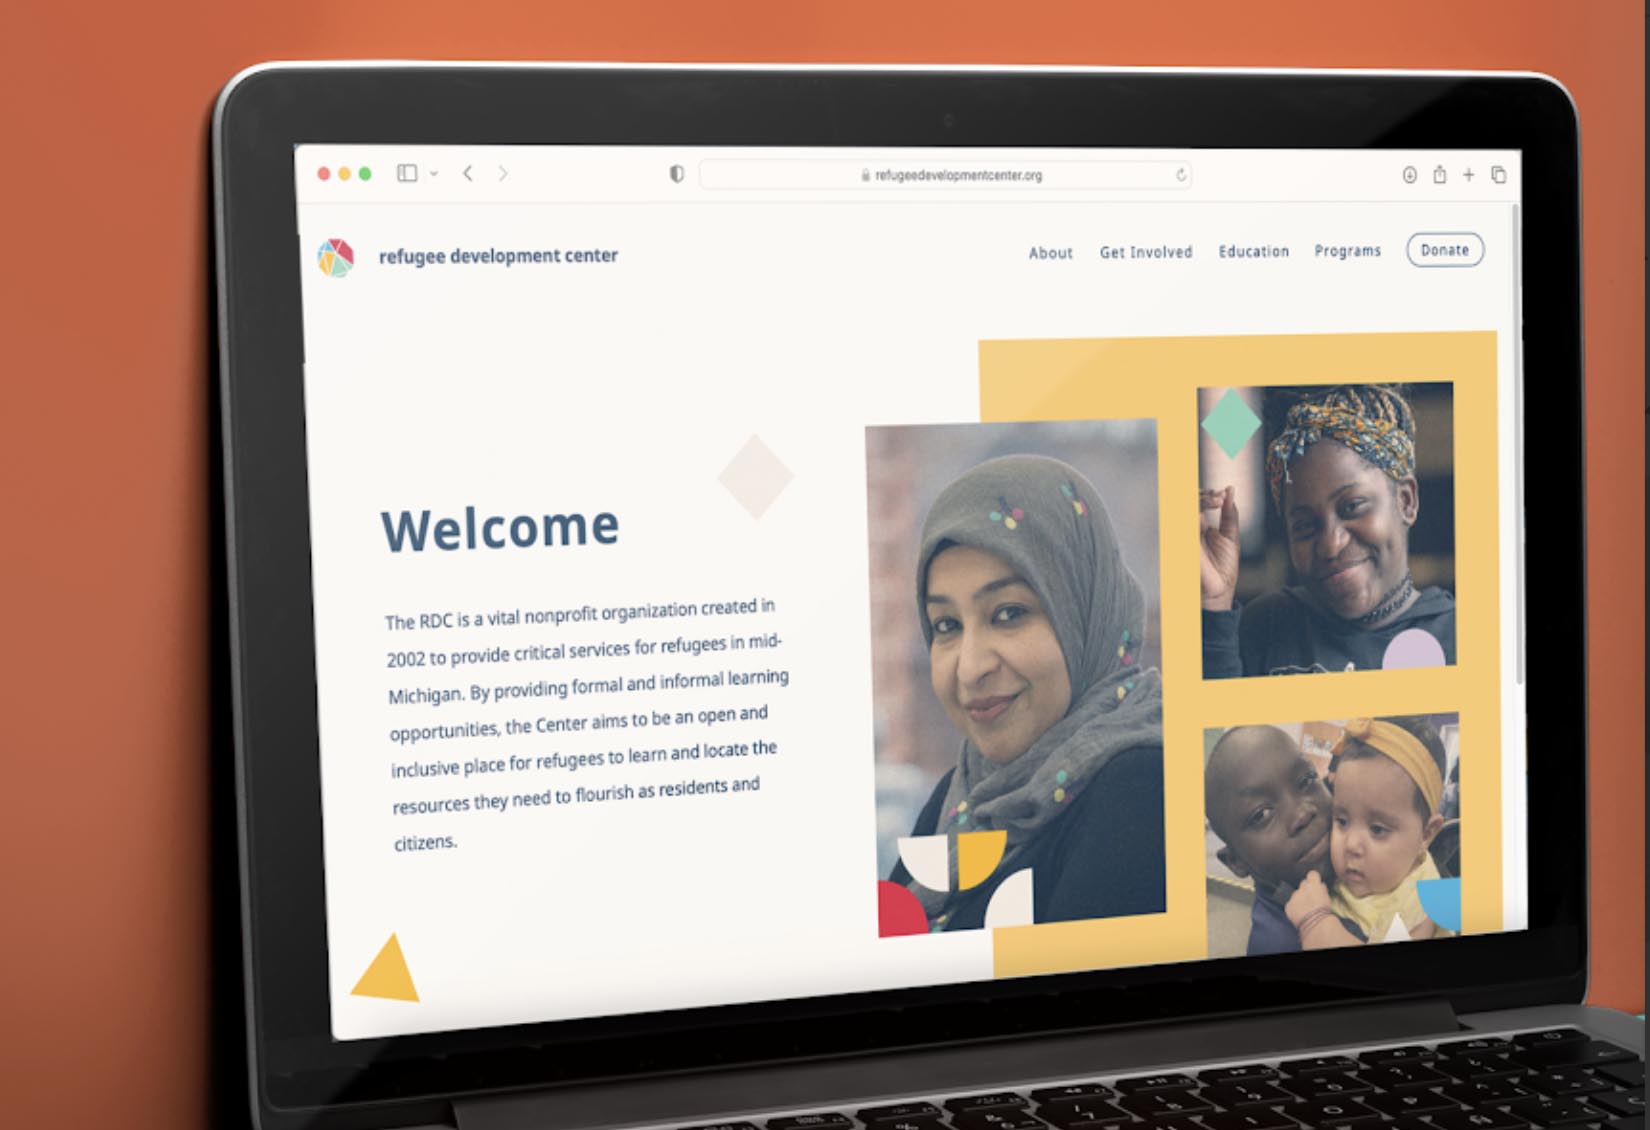 The homepage for the RDC website is displayed on a laptop. The screen includes a photo of a smiling woman and reads "Welcome."